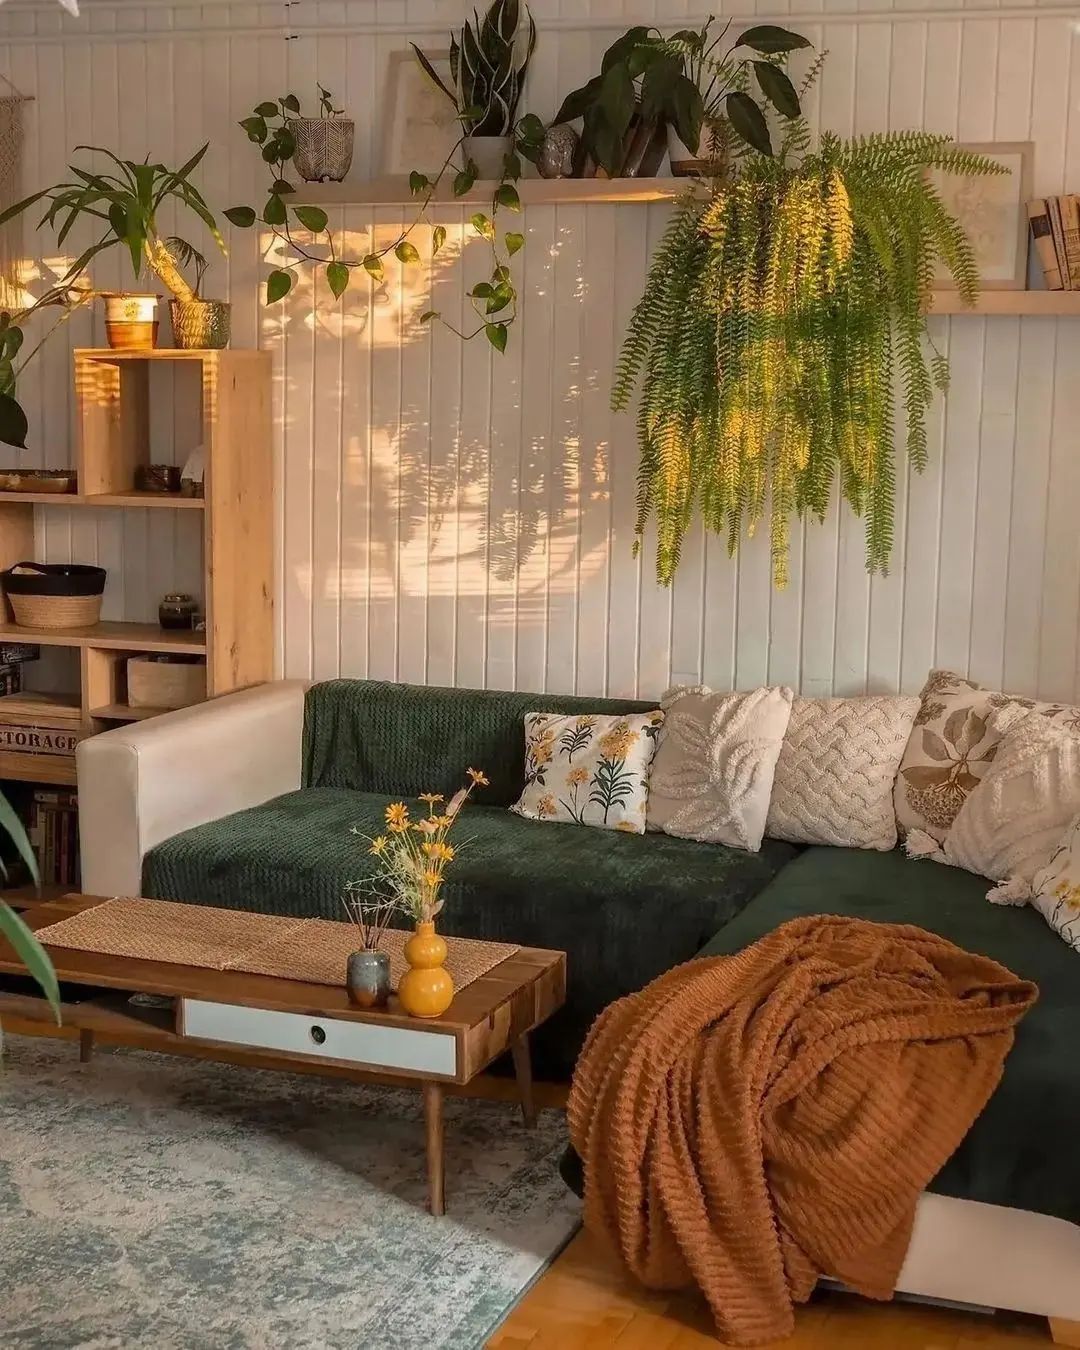 couch with throw pillows and a blanket, and plants including foliage above to add life to this bohemian_inspired interior